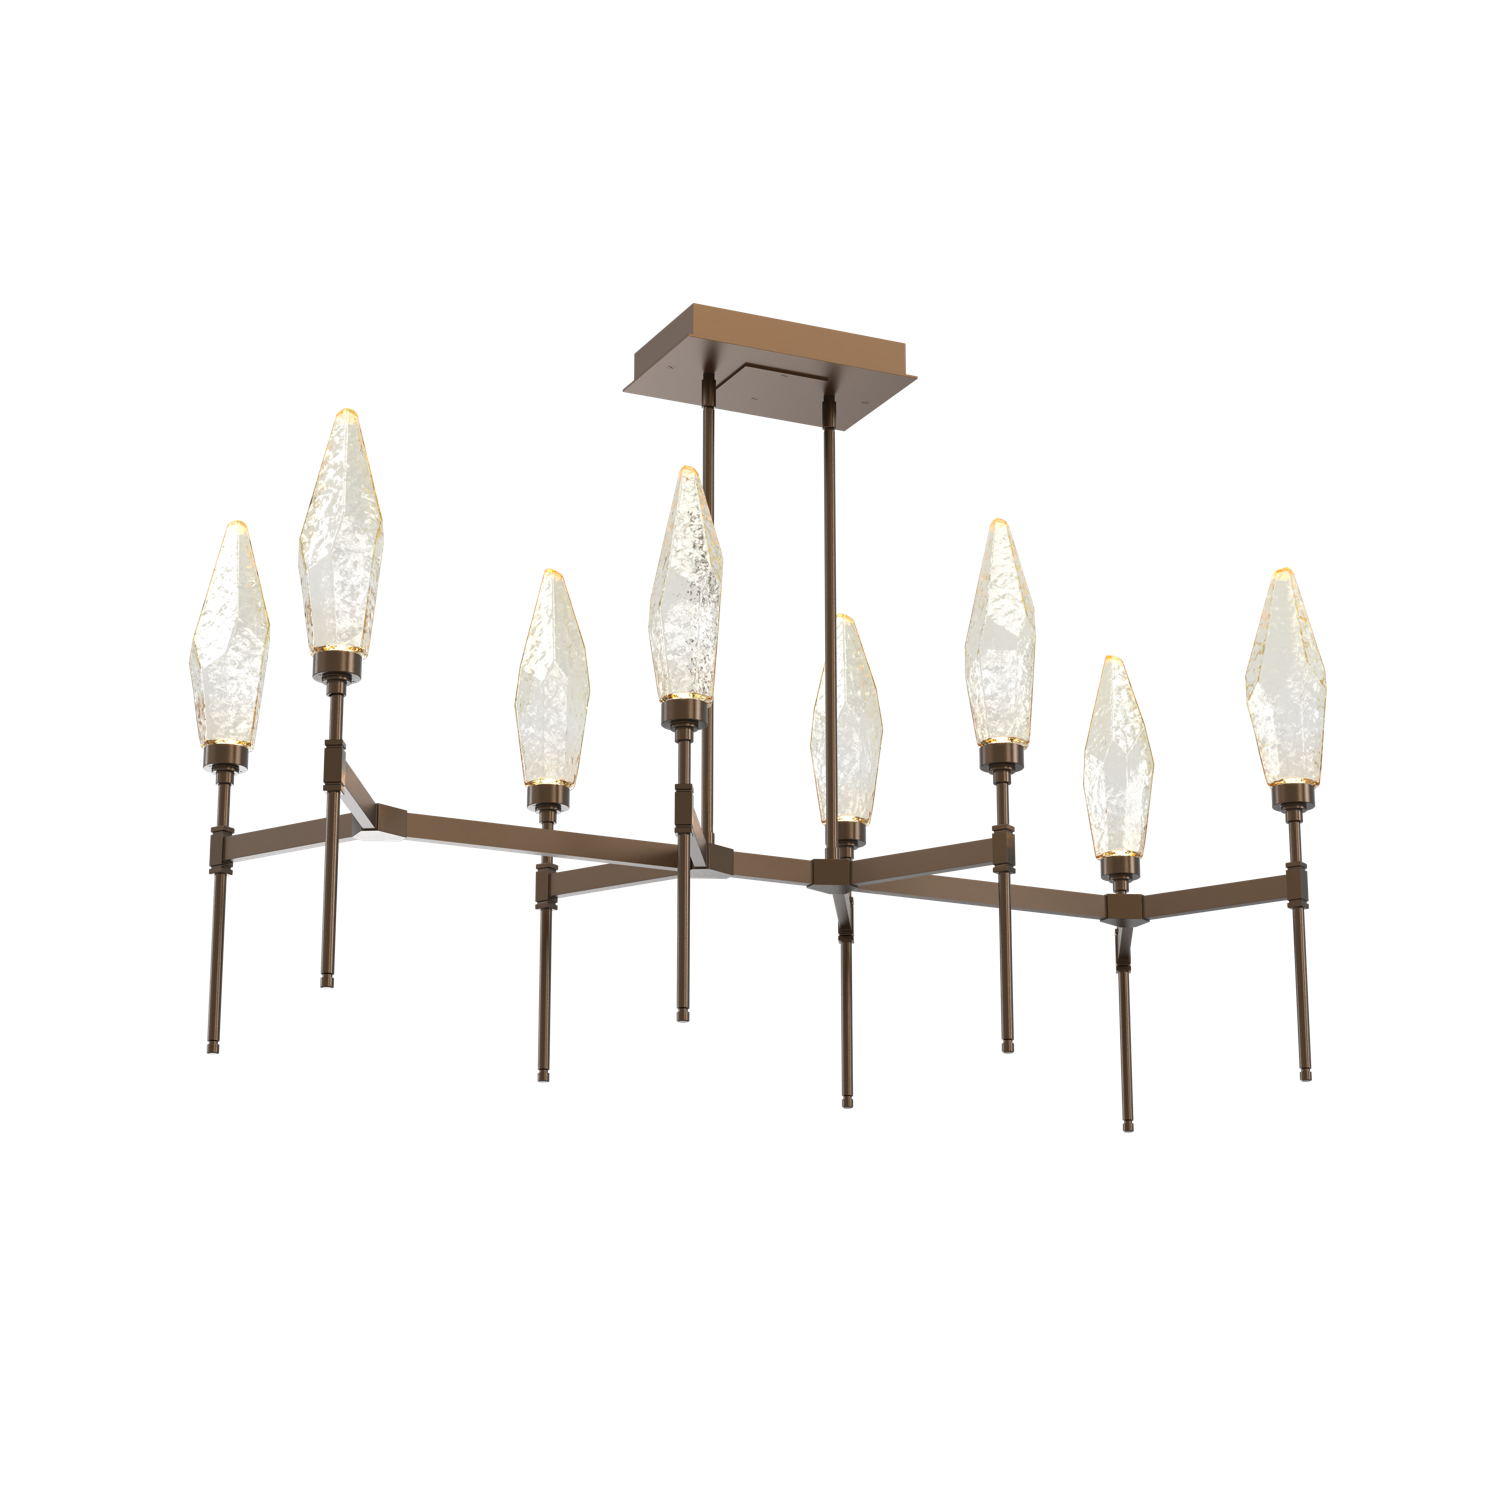 PLB0050-48-FB-CA-Hammerton-Studio-Rock-Crystal-48-inch-linear-belvedere-chandelier-with-flat-bronze-finish-and-chilled-amber-blown-glass-shades-and-LED-lamping